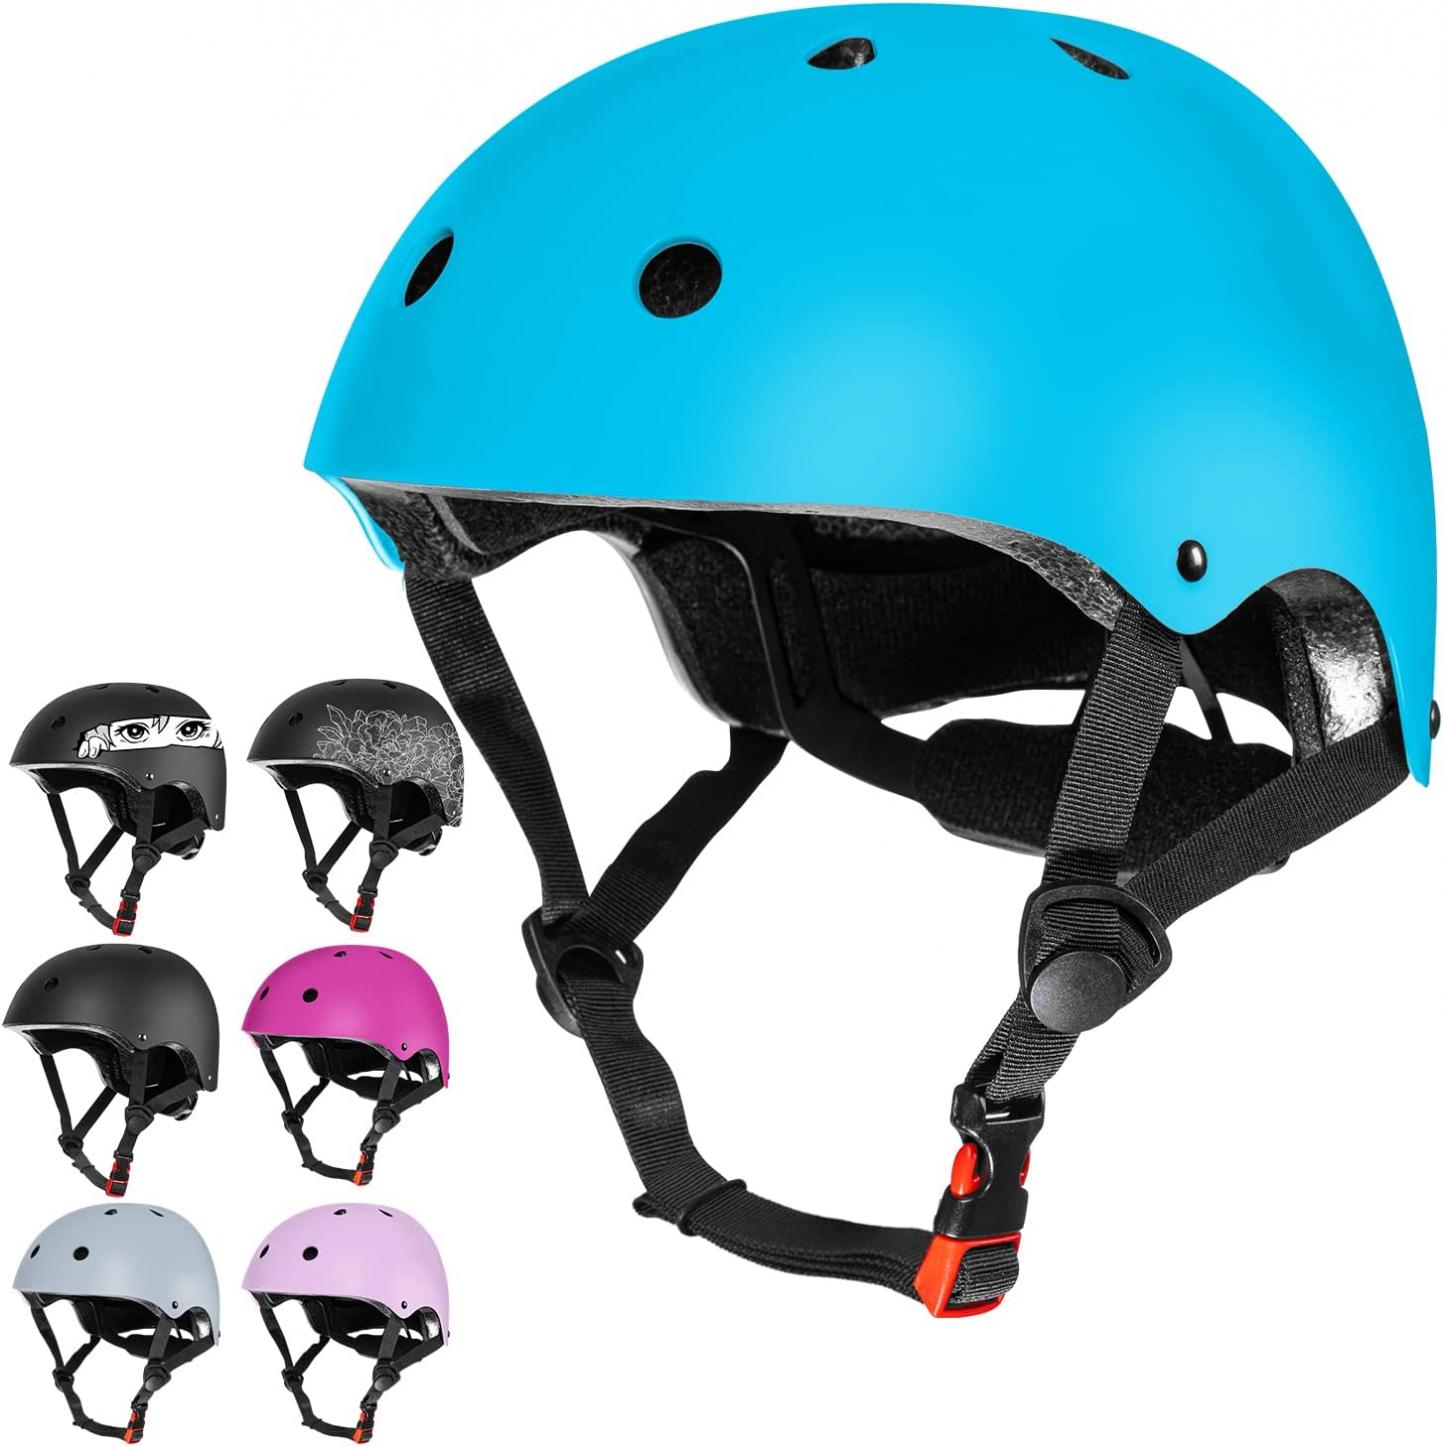 MhIL Adults & Kids Bike Helmets for Men & Women – Kids Helmet for Boys & Girls, Bicycle Kids Helmets Ages 5-8/8-14+ - for Skateboard, Scooter, Cycling, Adjustable Helmets for Toddlers, Kids & Adults